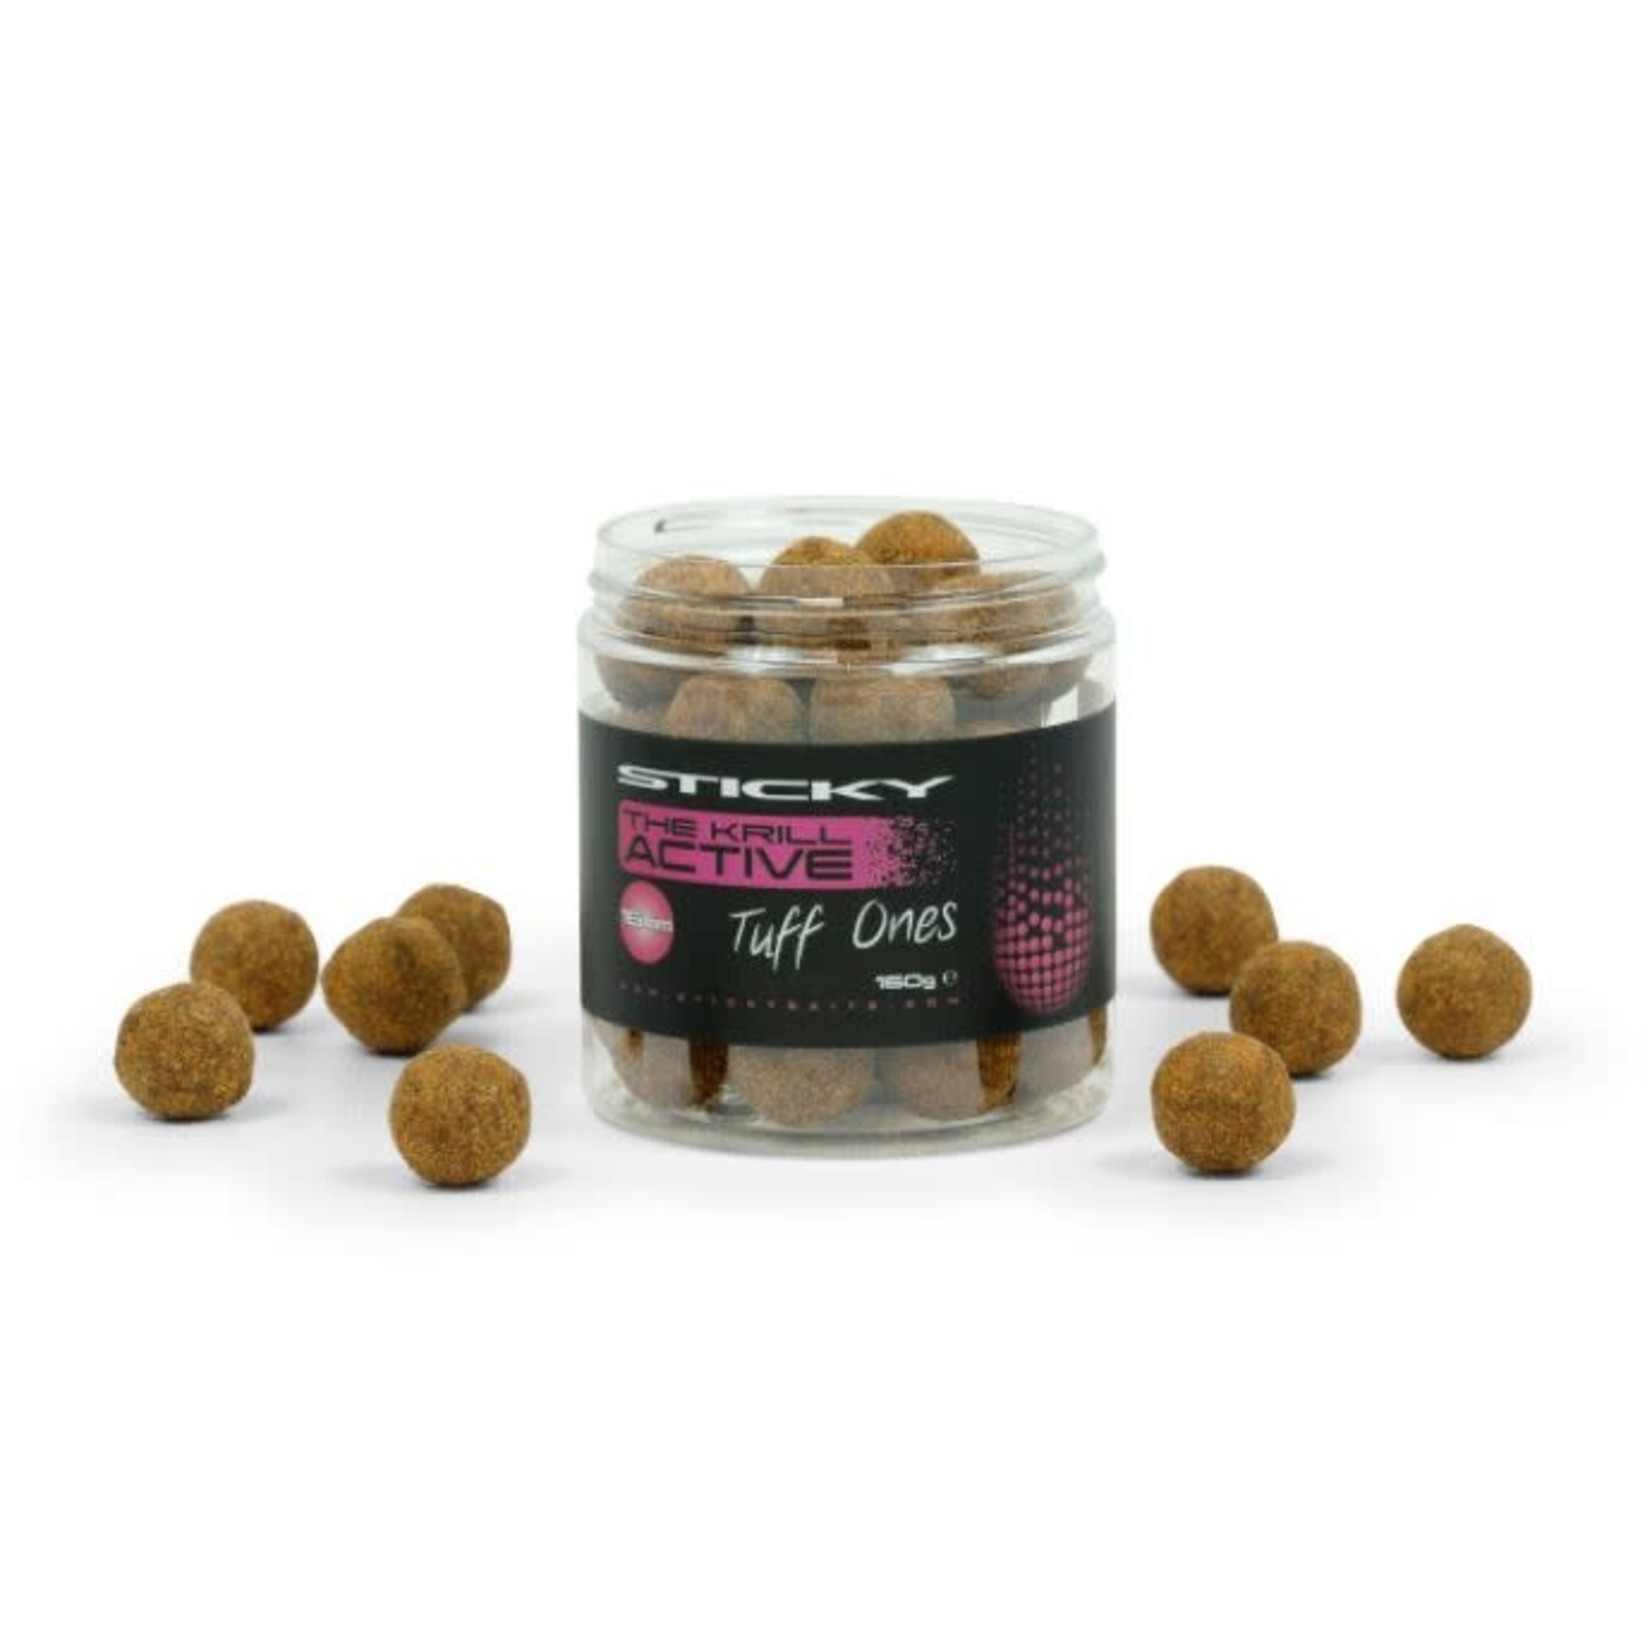 STICKY The Krill Active Tuff Ones 16mm